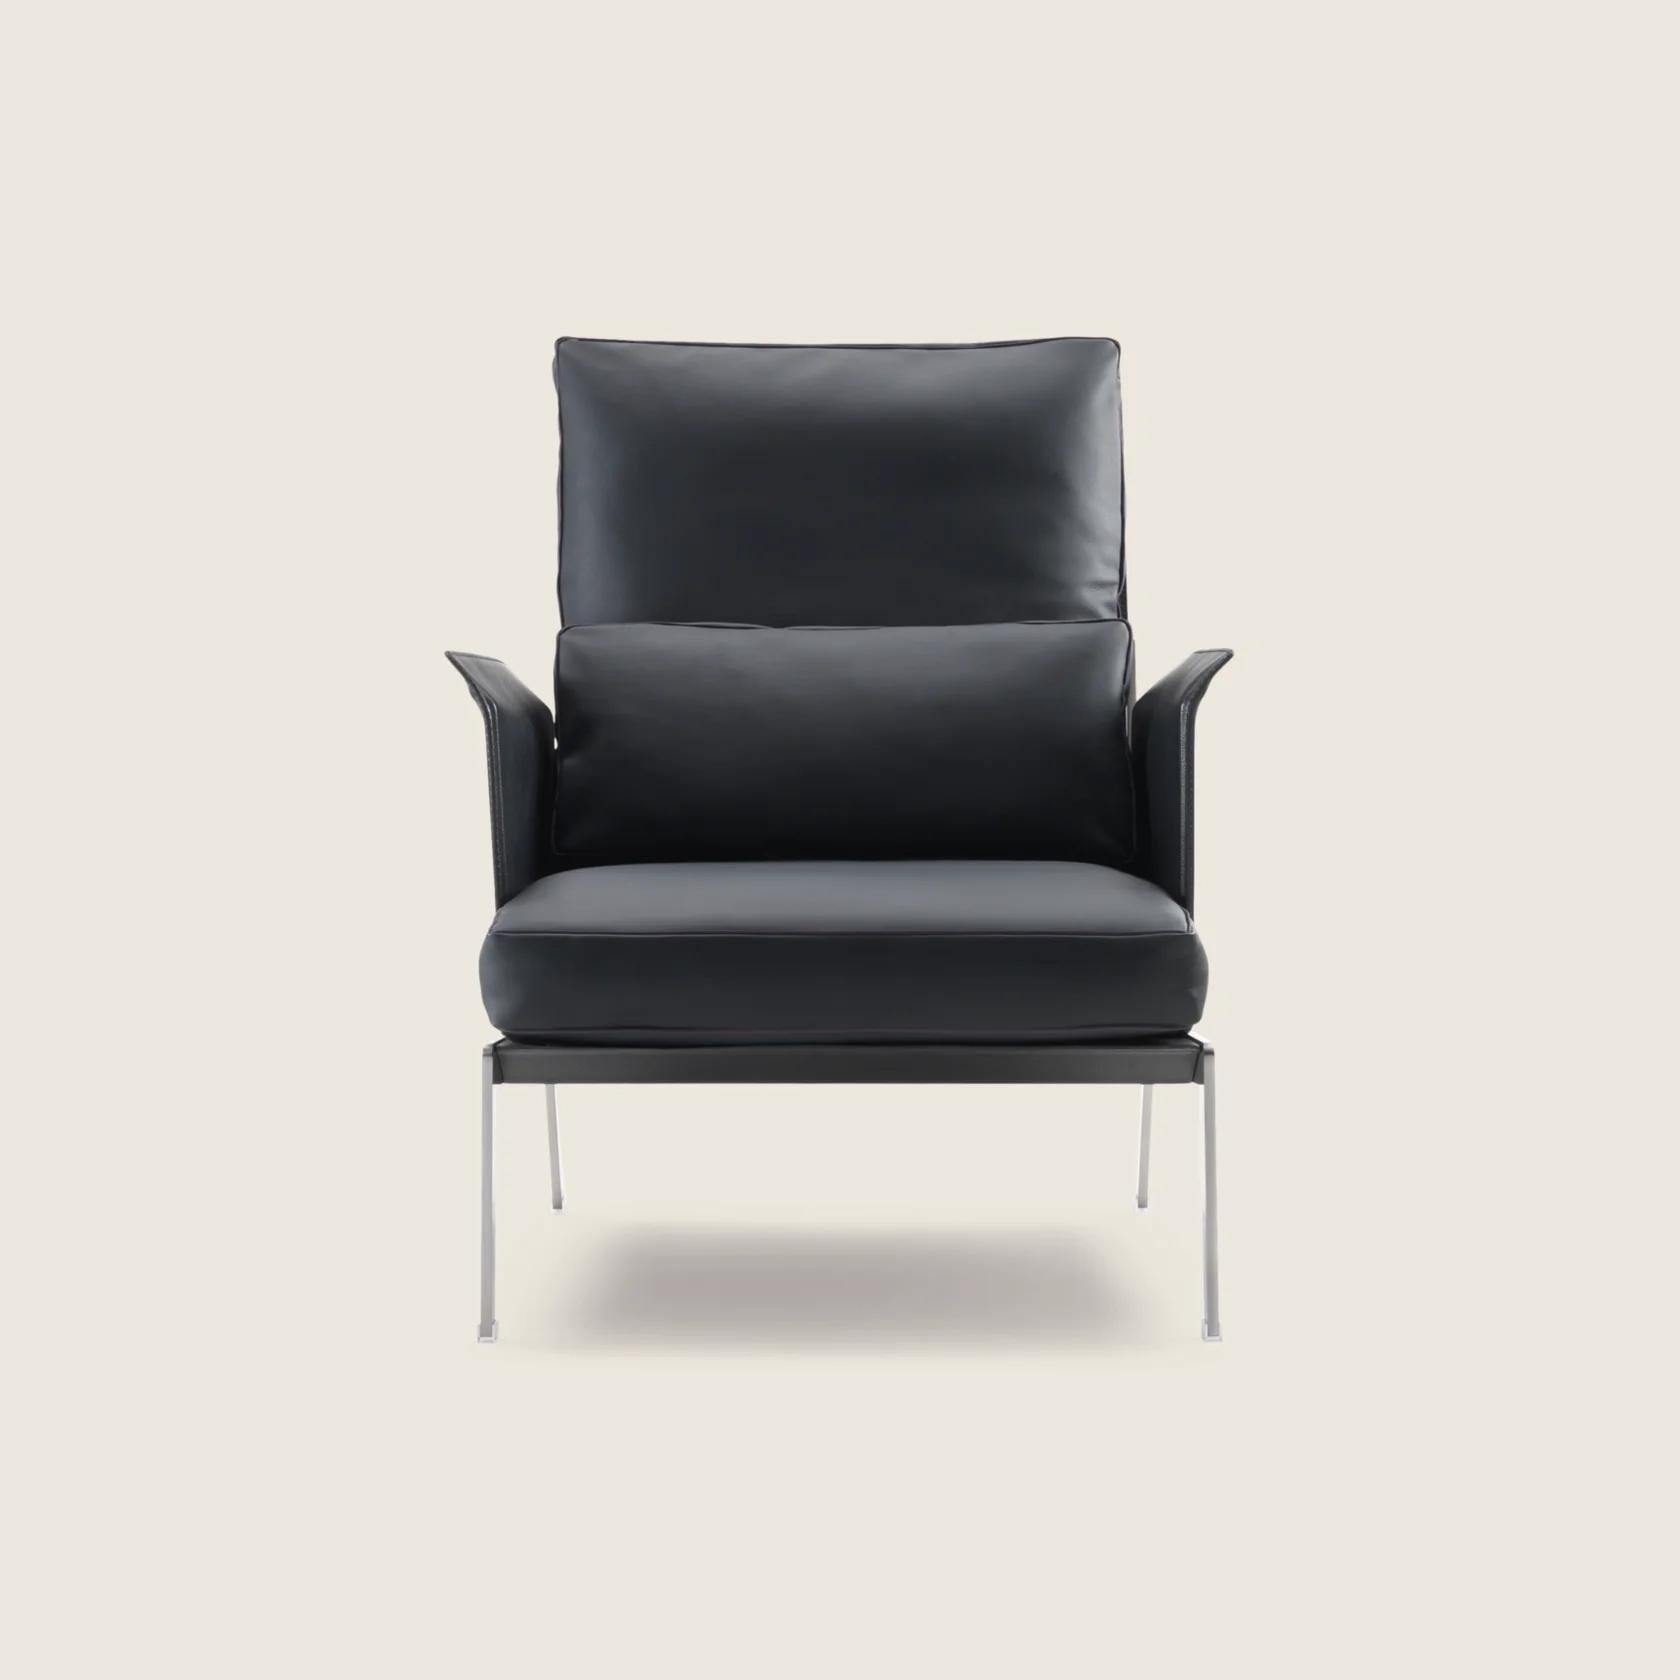 014B01_HAPPY HOUR_ARMCHAIR_02.png